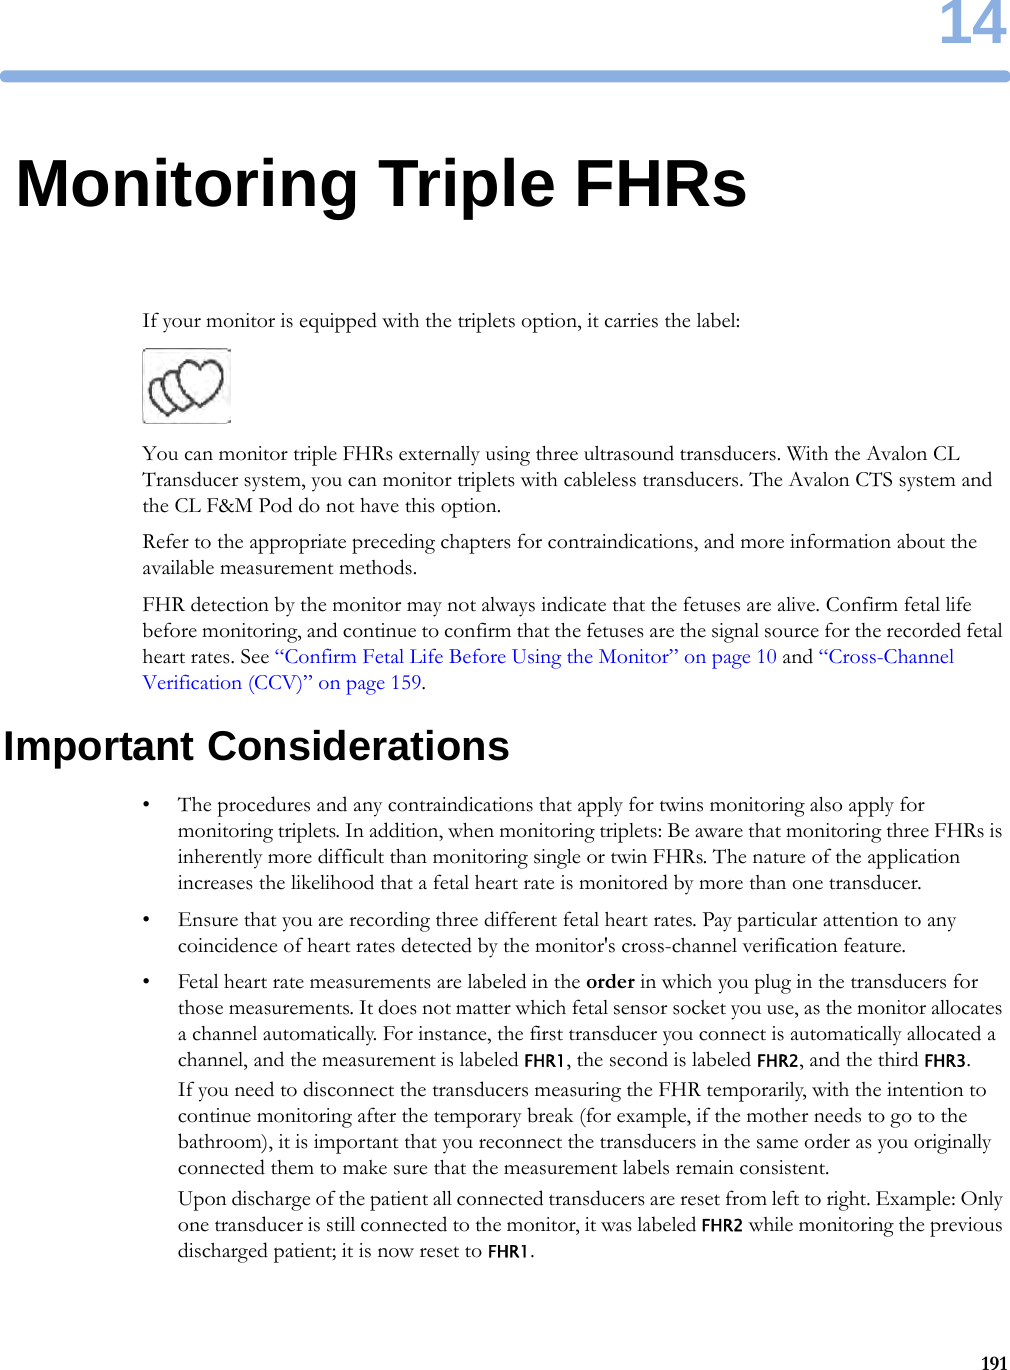 1419114Monitoring Triple FHRsIf your monitor is equipped with the triplets option, it carries the label: You can monitor triple FHRs externally using three ultrasound transducers. With the Avalon CL Transducer system, you can monitor triplets with cableless transducers. The Avalon CTS system and the CL F&amp;M Pod do not have this option.Refer to the appropriate preceding chapters for contraindications, and more information about the available measurement methods.FHR detection by the monitor may not always indicate that the fetuses are alive. Confirm fetal life before monitoring, and continue to confirm that the fetuses are the signal source for the recorded fetal heart rates. See “Confirm Fetal Life Before Using the Monitor” on page 10 and “Cross-Channel Verification (CCV)” on page 159.Important Considerations• The procedures and any contraindications that apply for twins monitoring also apply for monitoring triplets. In addition, when monitoring triplets: Be aware that monitoring three FHRs is inherently more difficult than monitoring single or twin FHRs. The nature of the application increases the likelihood that a fetal heart rate is monitored by more than one transducer.• Ensure that you are recording three different fetal heart rates. Pay particular attention to any coincidence of heart rates detected by the monitor&apos;s cross-channel verification feature.• Fetal heart rate measurements are labeled in the order in which you plug in the transducers for those measurements. It does not matter which fetal sensor socket you use, as the monitor allocates a channel automatically. For instance, the first transducer you connect is automatically allocated a channel, and the measurement is labeled FHR1, the second is labeled FHR2, and the third FHR3.If you need to disconnect the transducers measuring the FHR temporarily, with the intention to continue monitoring after the temporary break (for example, if the mother needs to go to the bathroom), it is important that you reconnect the transducers in the same order as you originally connected them to make sure that the measurement labels remain consistent.Upon discharge of the patient all connected transducers are reset from left to right. Example: Only one transducer is still connected to the monitor, it was labeled FHR2 while monitoring the previous discharged patient; it is now reset to FHR1.